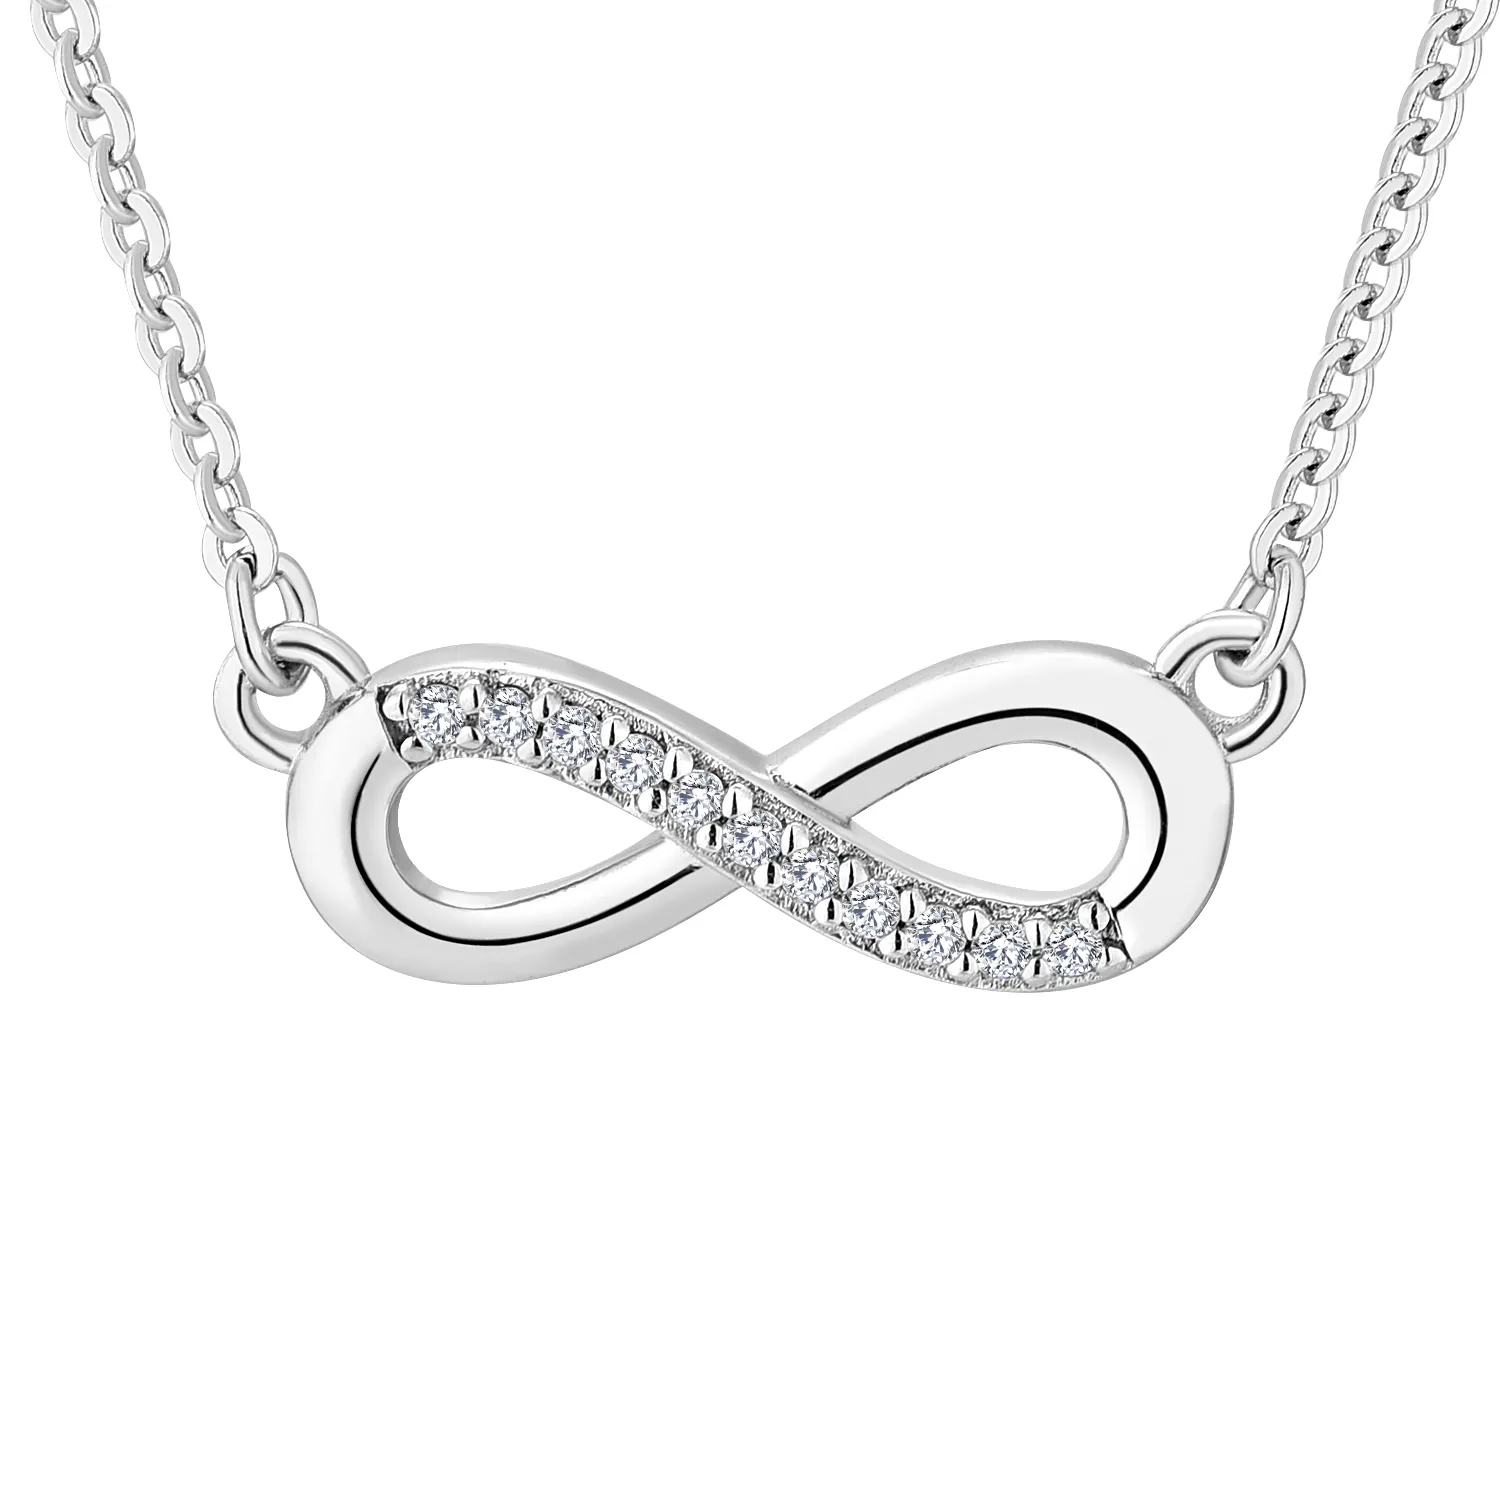 Infinity Pendant Necklace For Women 925 Sterling Silver Love Heart Necklace Jewelry Valentine Gift For Women Girls